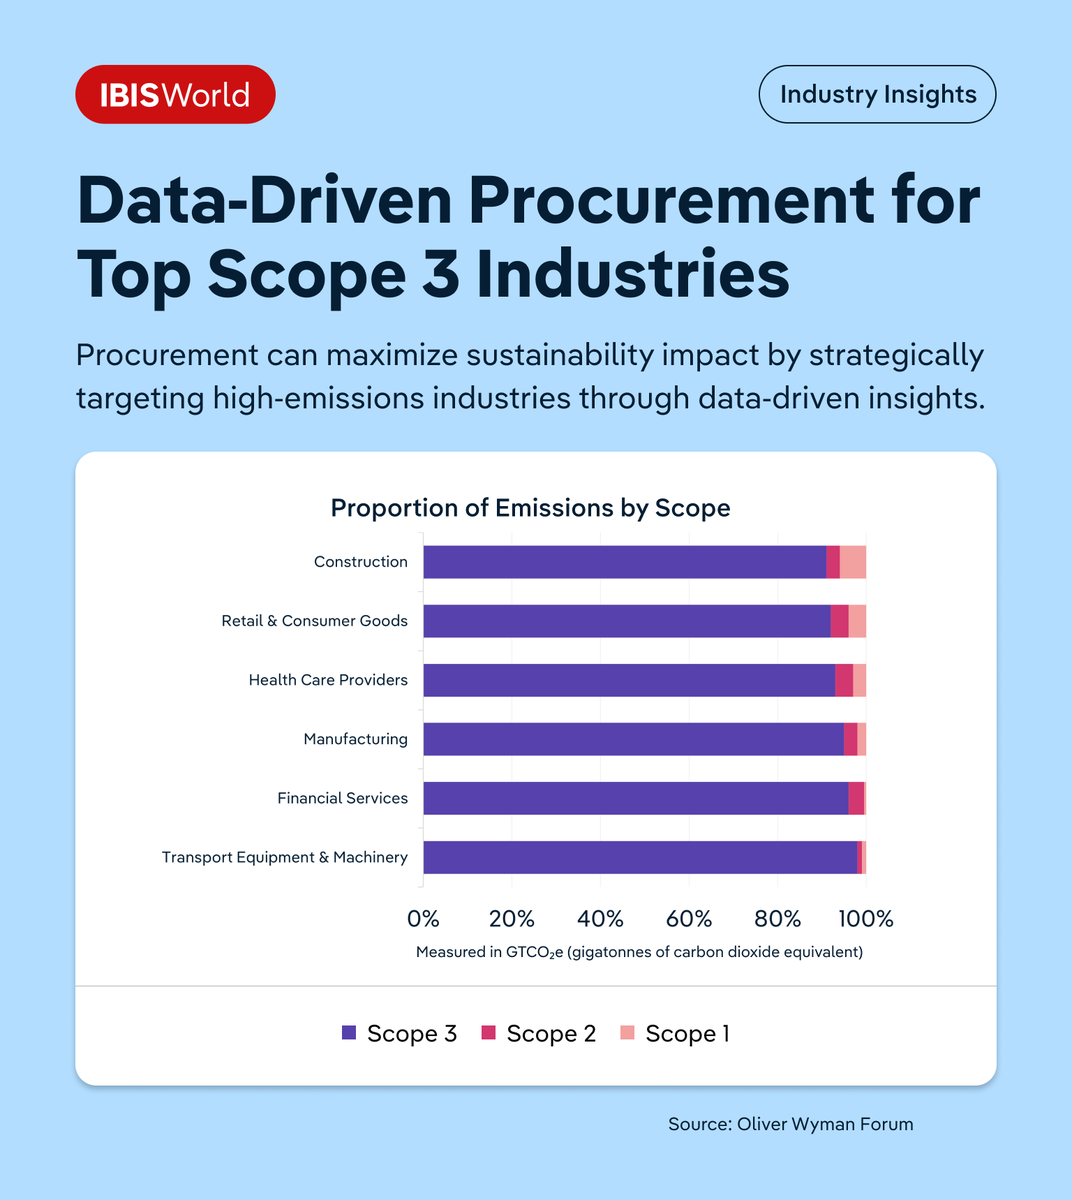 Companies are recognizing that addressing #Scope3Emissions, which can make up over 80% of a business's carbon footprint, is crucial for achieving net zero 🌱

💭 Are you leveraging data to drive sustainability in your procurement efforts? Share your thoughts below 👇